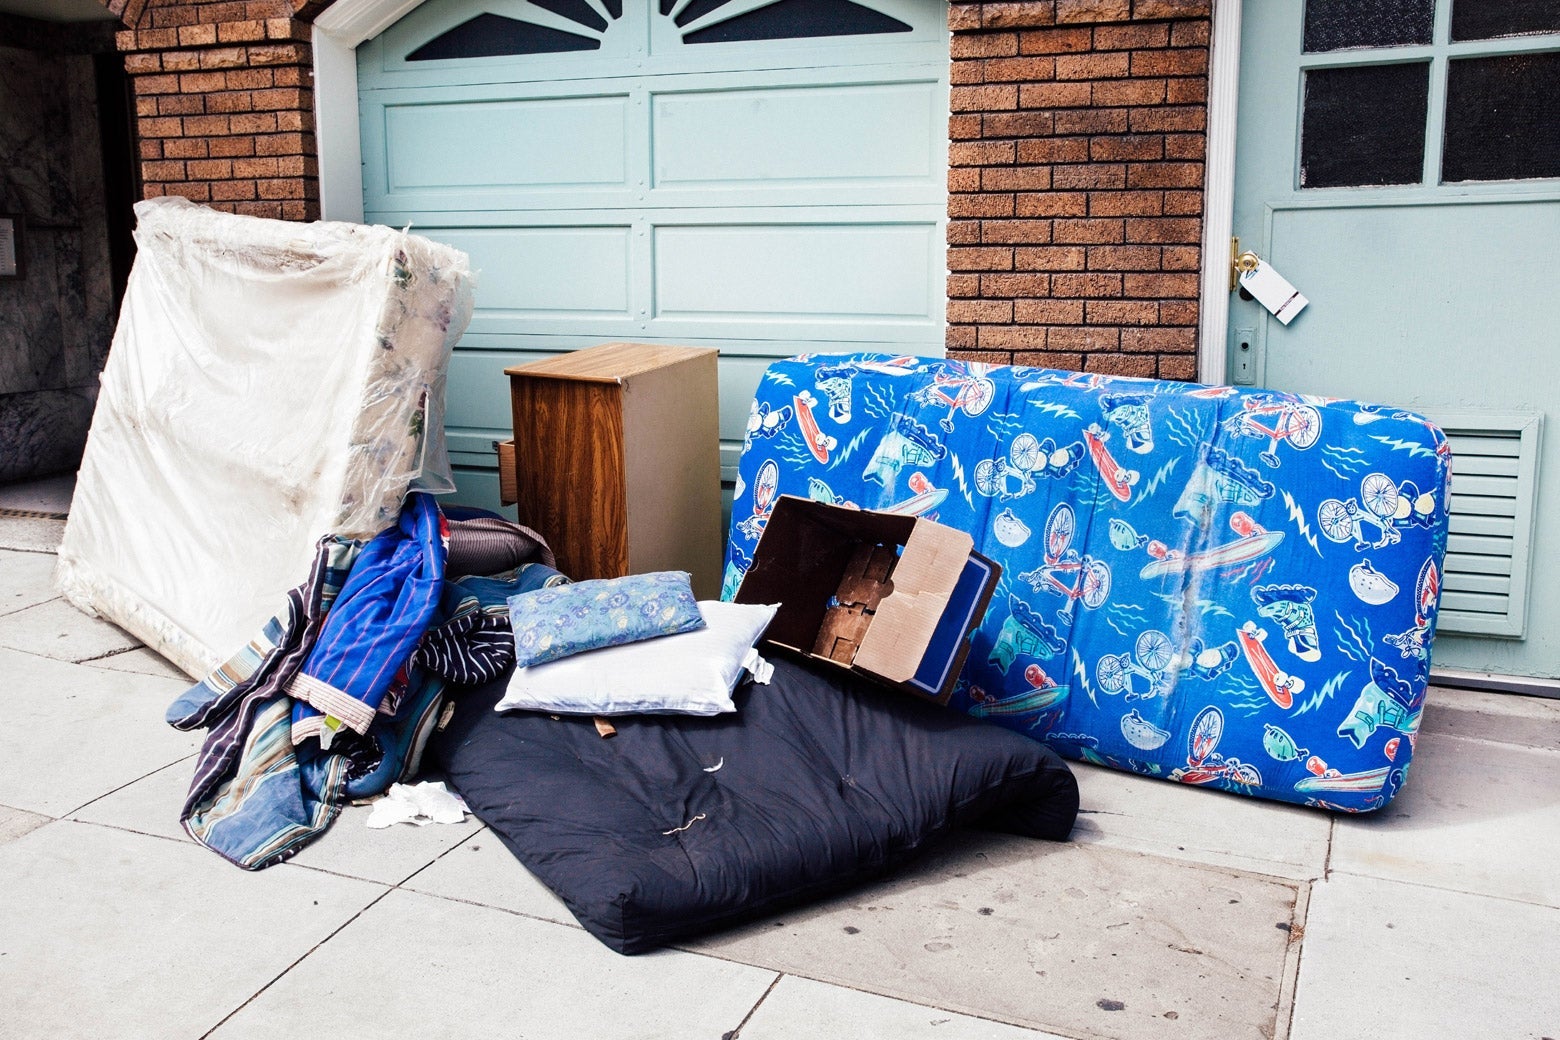 A mattress and other personal items outside a home following an eviction.